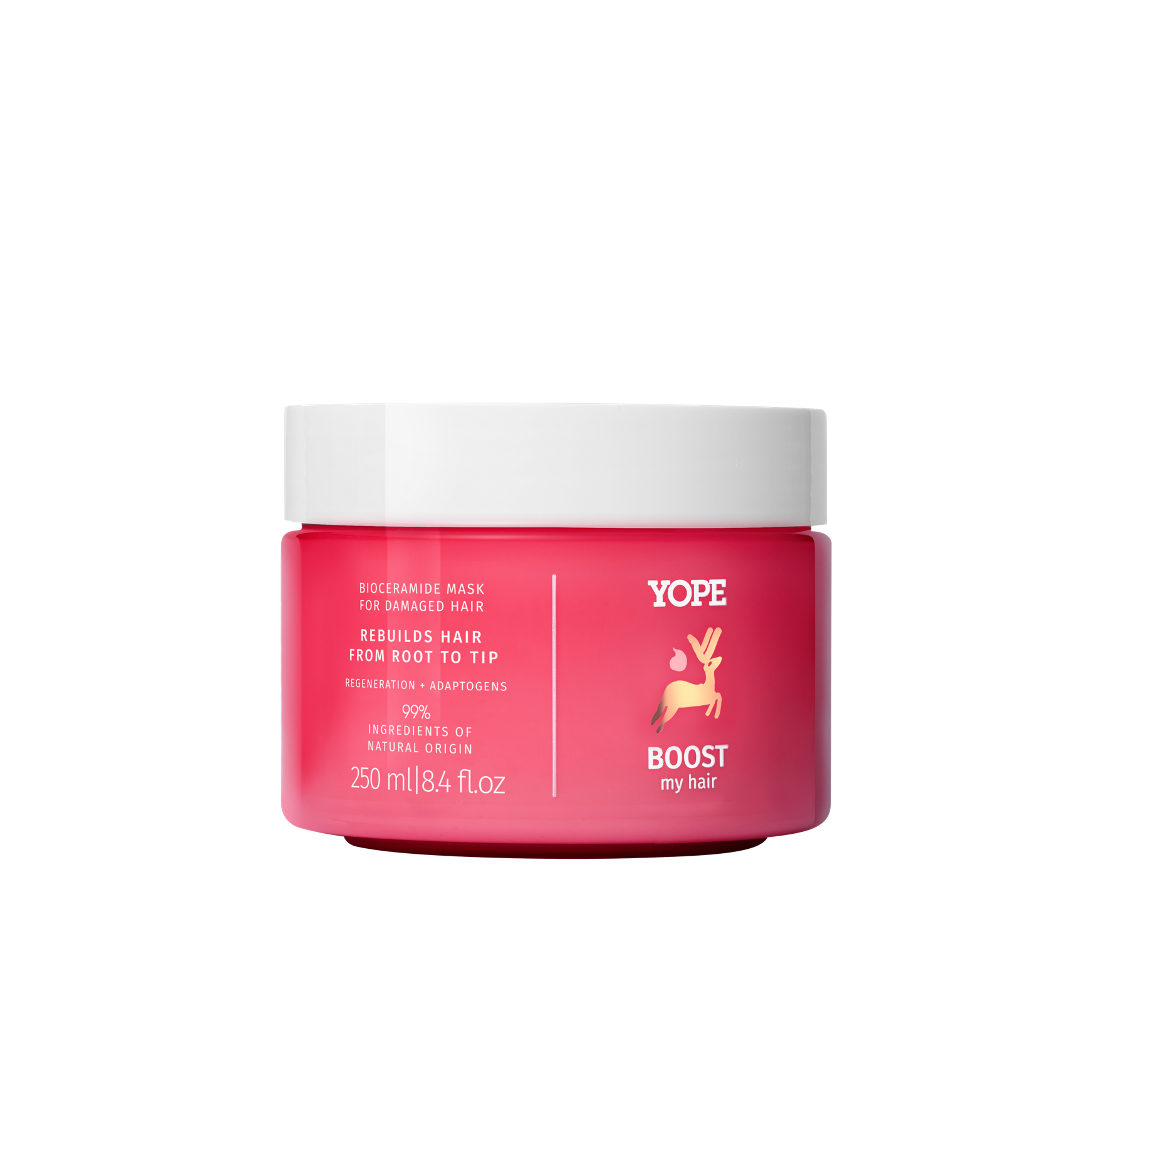 YOPE BOOST 受損髮質生物神經酰胺髮膜/ Hair Mask For Damaged Hair With Bioceramides